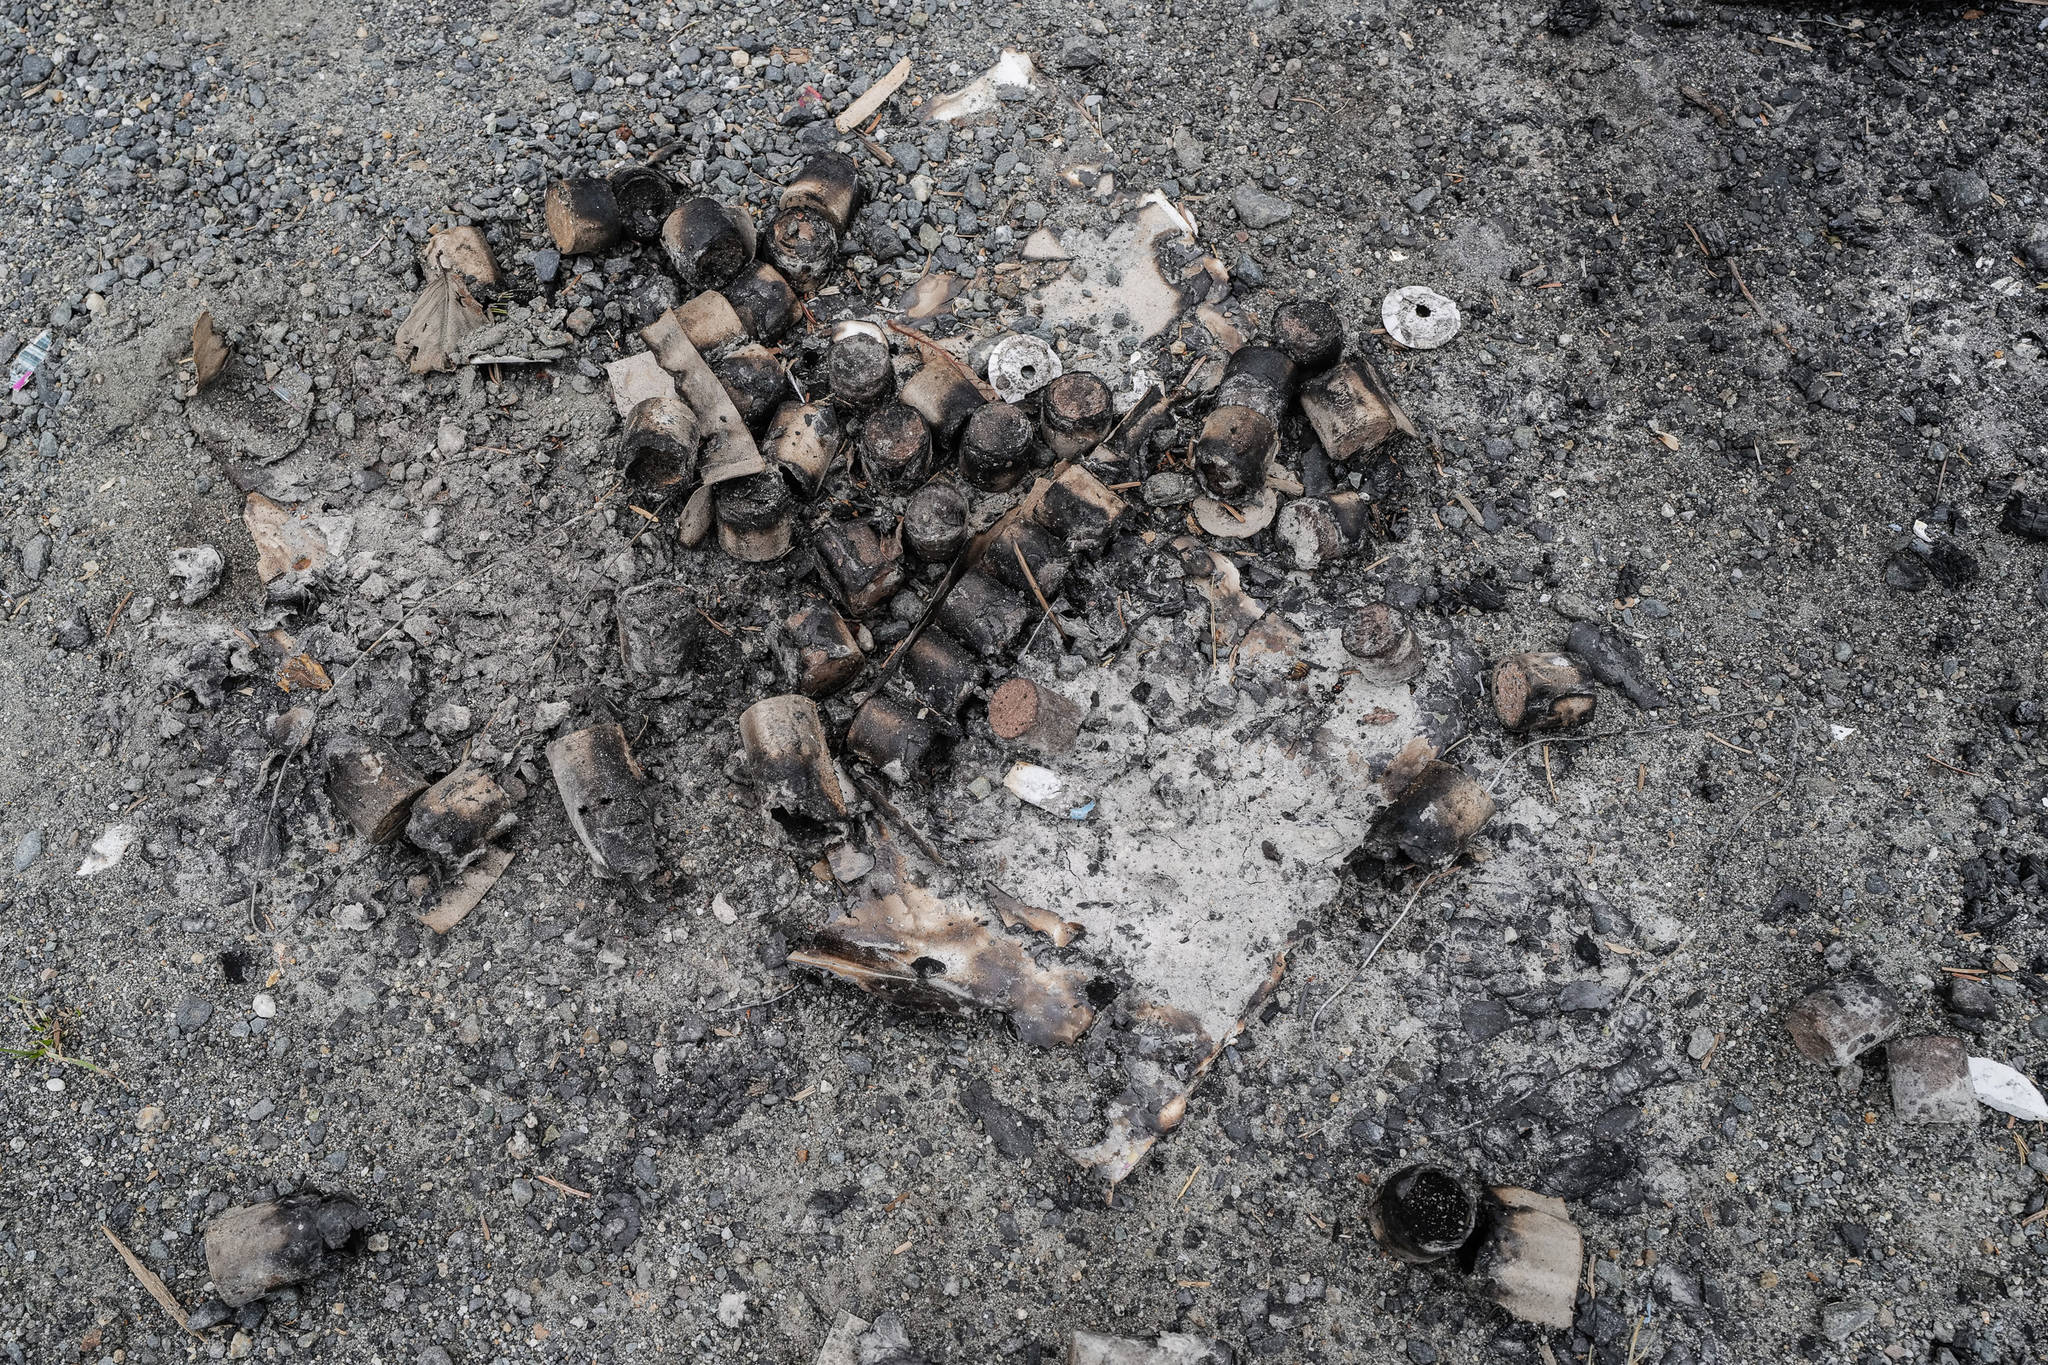 Remnants of fireworks at Sunshine Cove on Monday, Aug. 19, 2019. Capital City Fire/Rescue reports they responded to a wildfire at Sunshine Cove Friday night. Fireworks found on the scene are the suspected cause of the fire according to Capital City Fire/Rescue Assistant Chief Chad Cameron. (Michael Penn Juneau Empire)